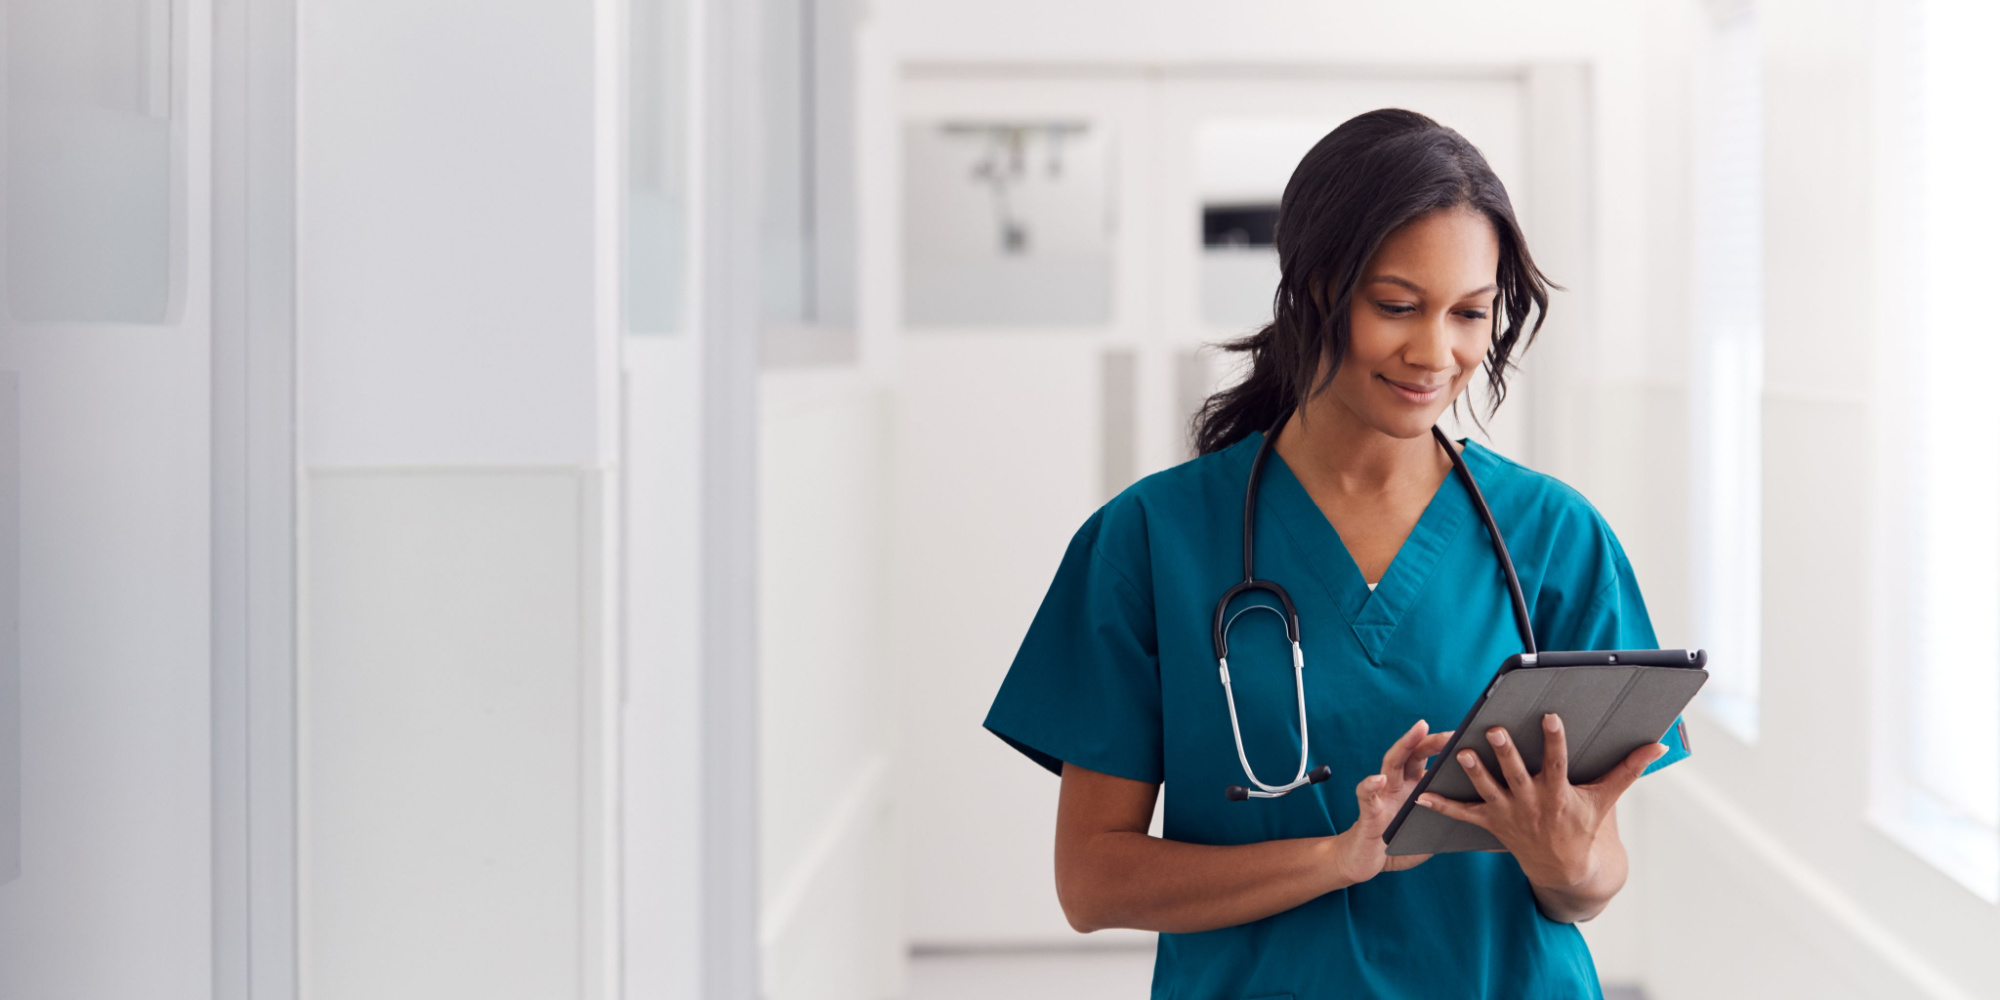 Doctors Need Apps Too: Designing Digital Health Experiences With Clinicians In Mind